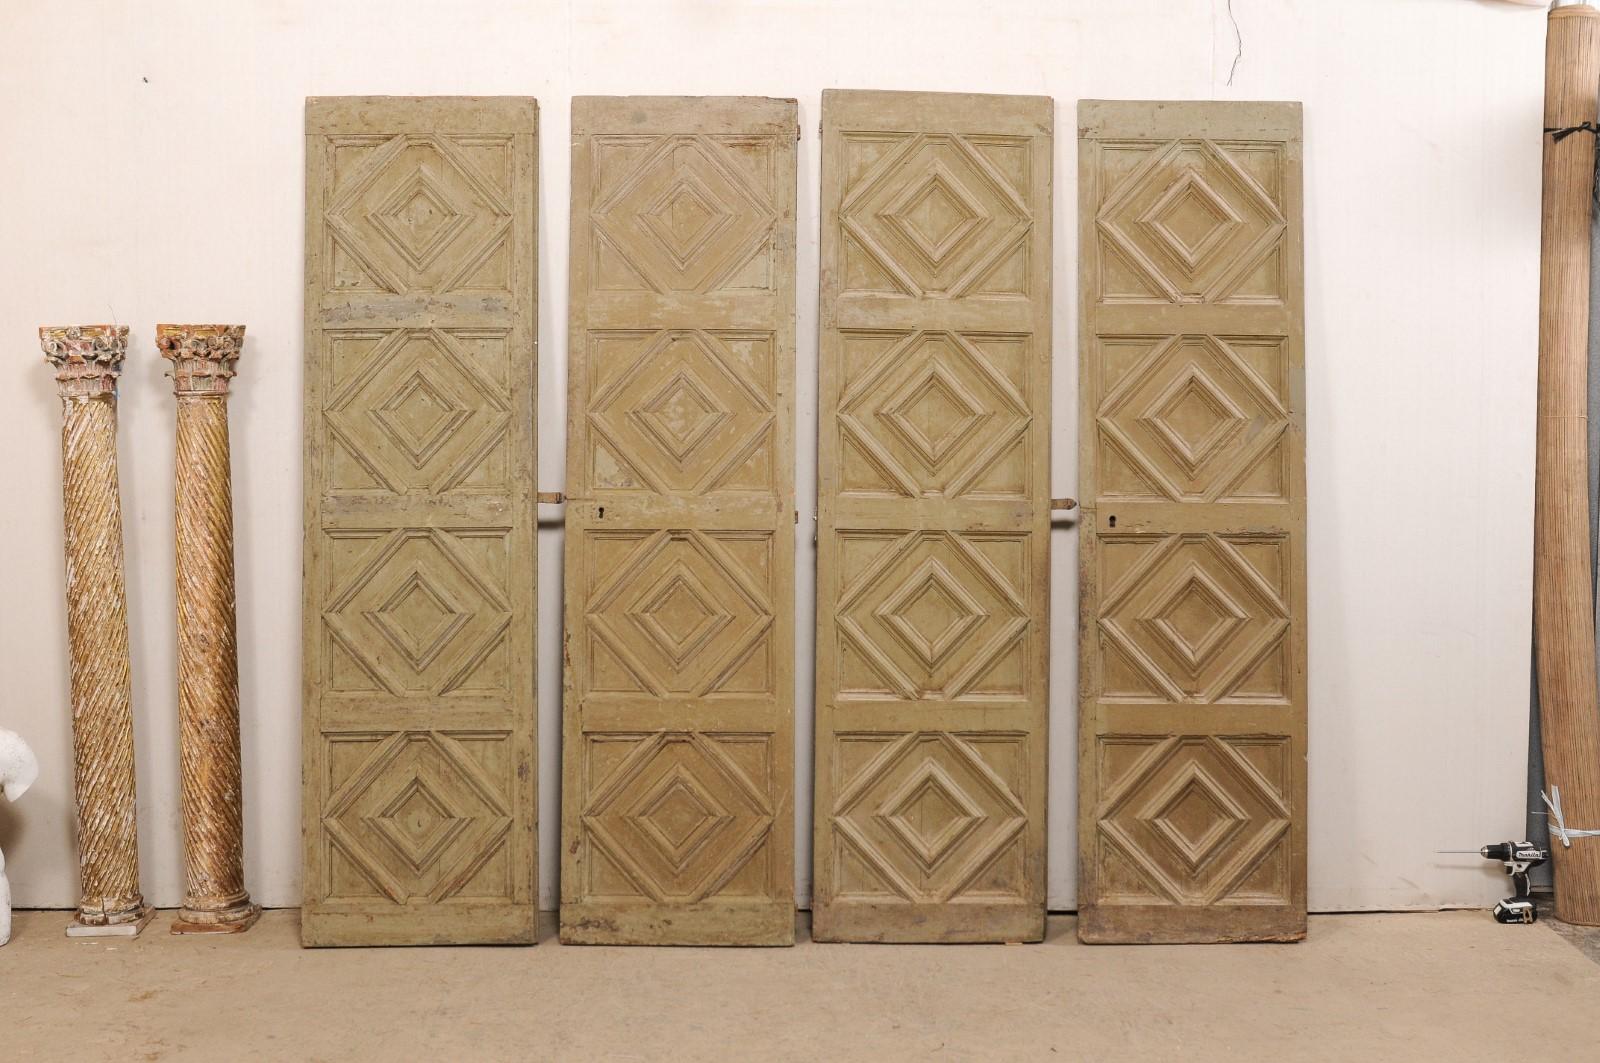 A Spanish set of two pair of raised-paneled doors from the 19th century. These antique doors from Spain, consisting of two pairs (four total doors), each feature a four stacked and raised panel design with large diamond shape carvings within the